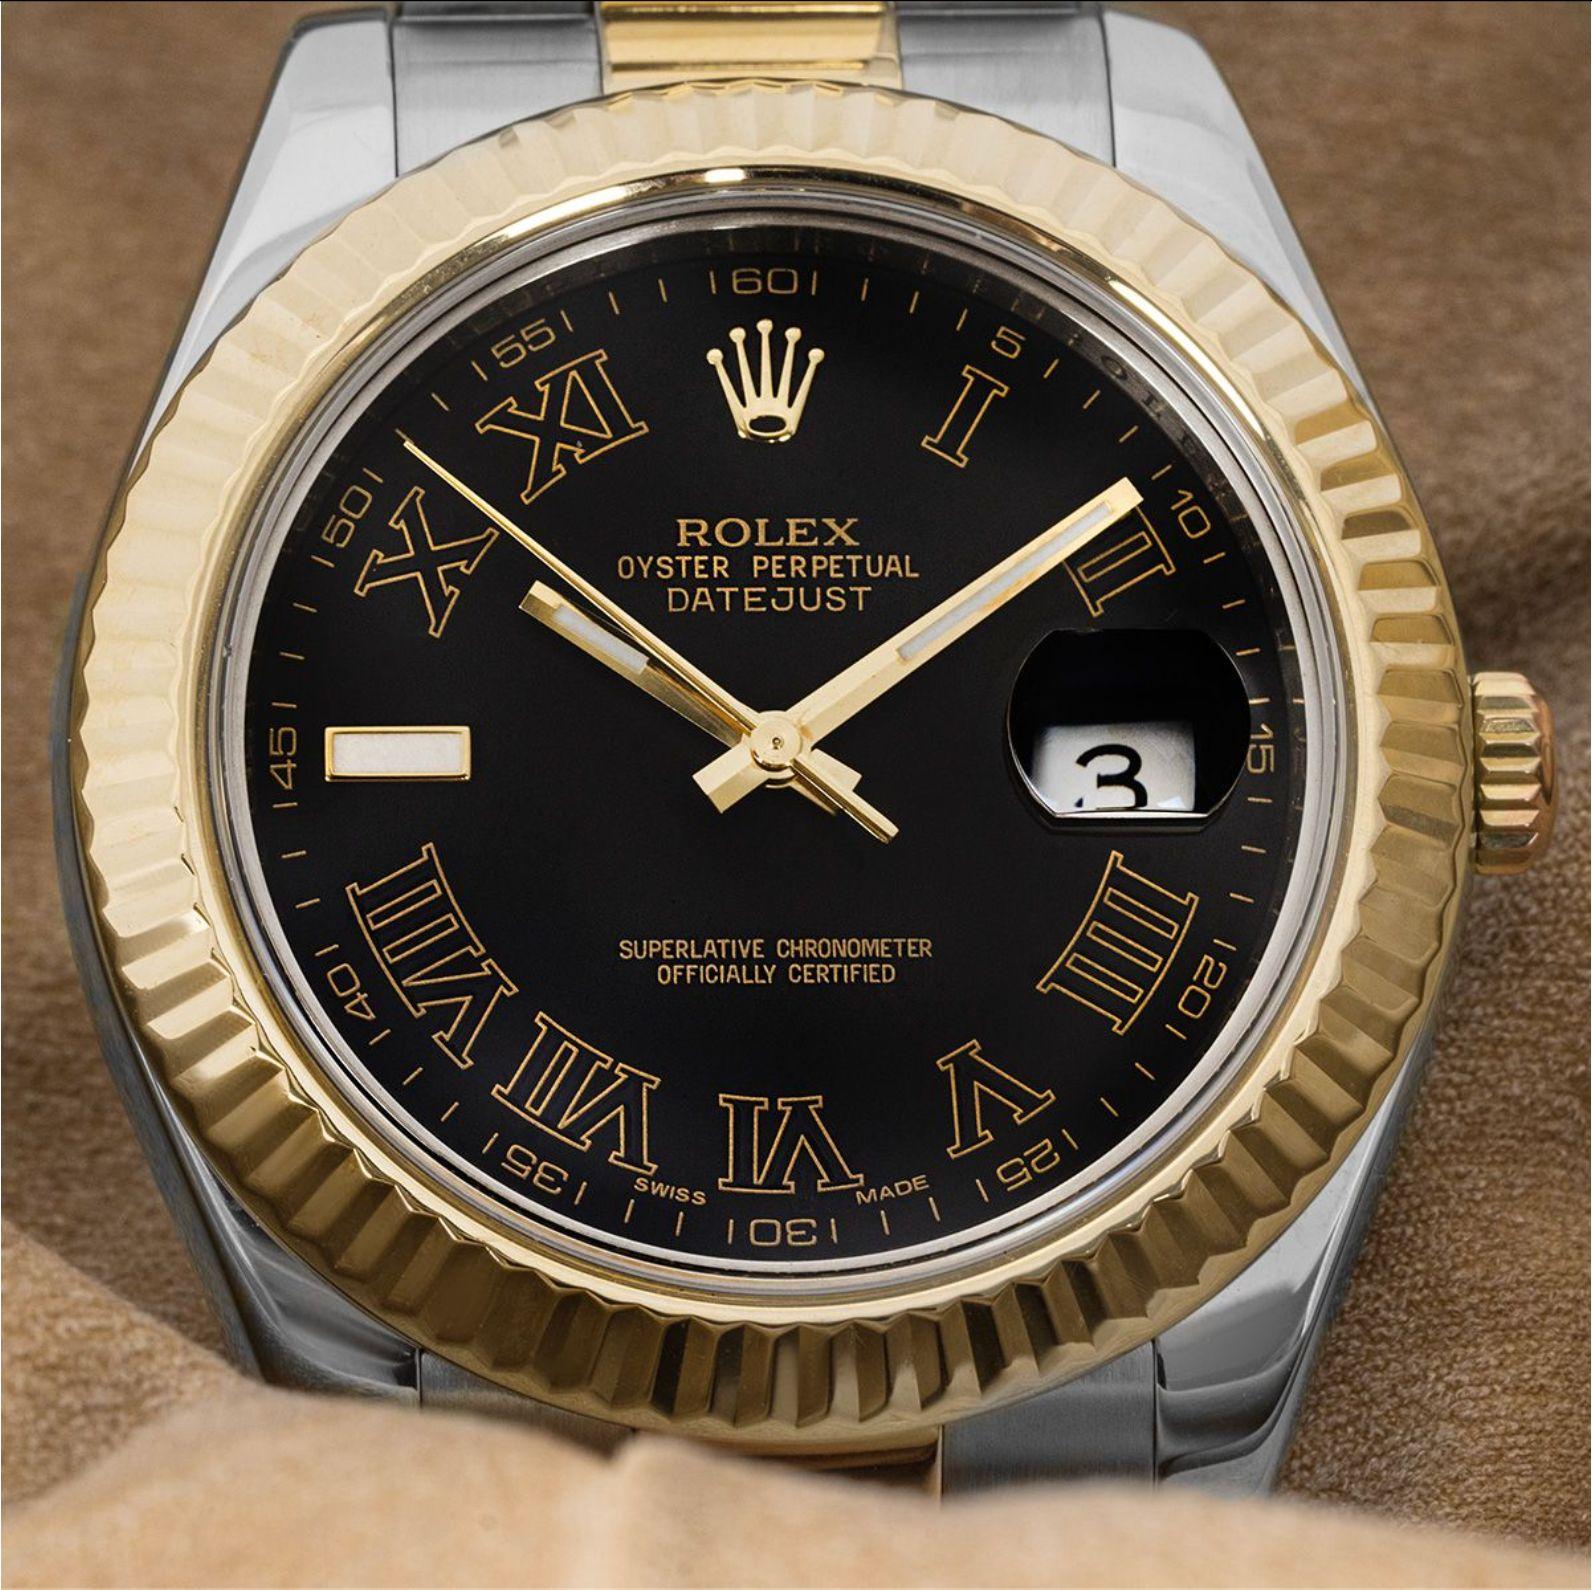 A 41mm Datejust II in steel and yellow gold by Rolex. Features a slate dial with roman numerals and a fluted yellow gold bezel. Fitted with a scratch-resistant sapphire crystal and a self-winding automatic movement. The watch is also equipped with